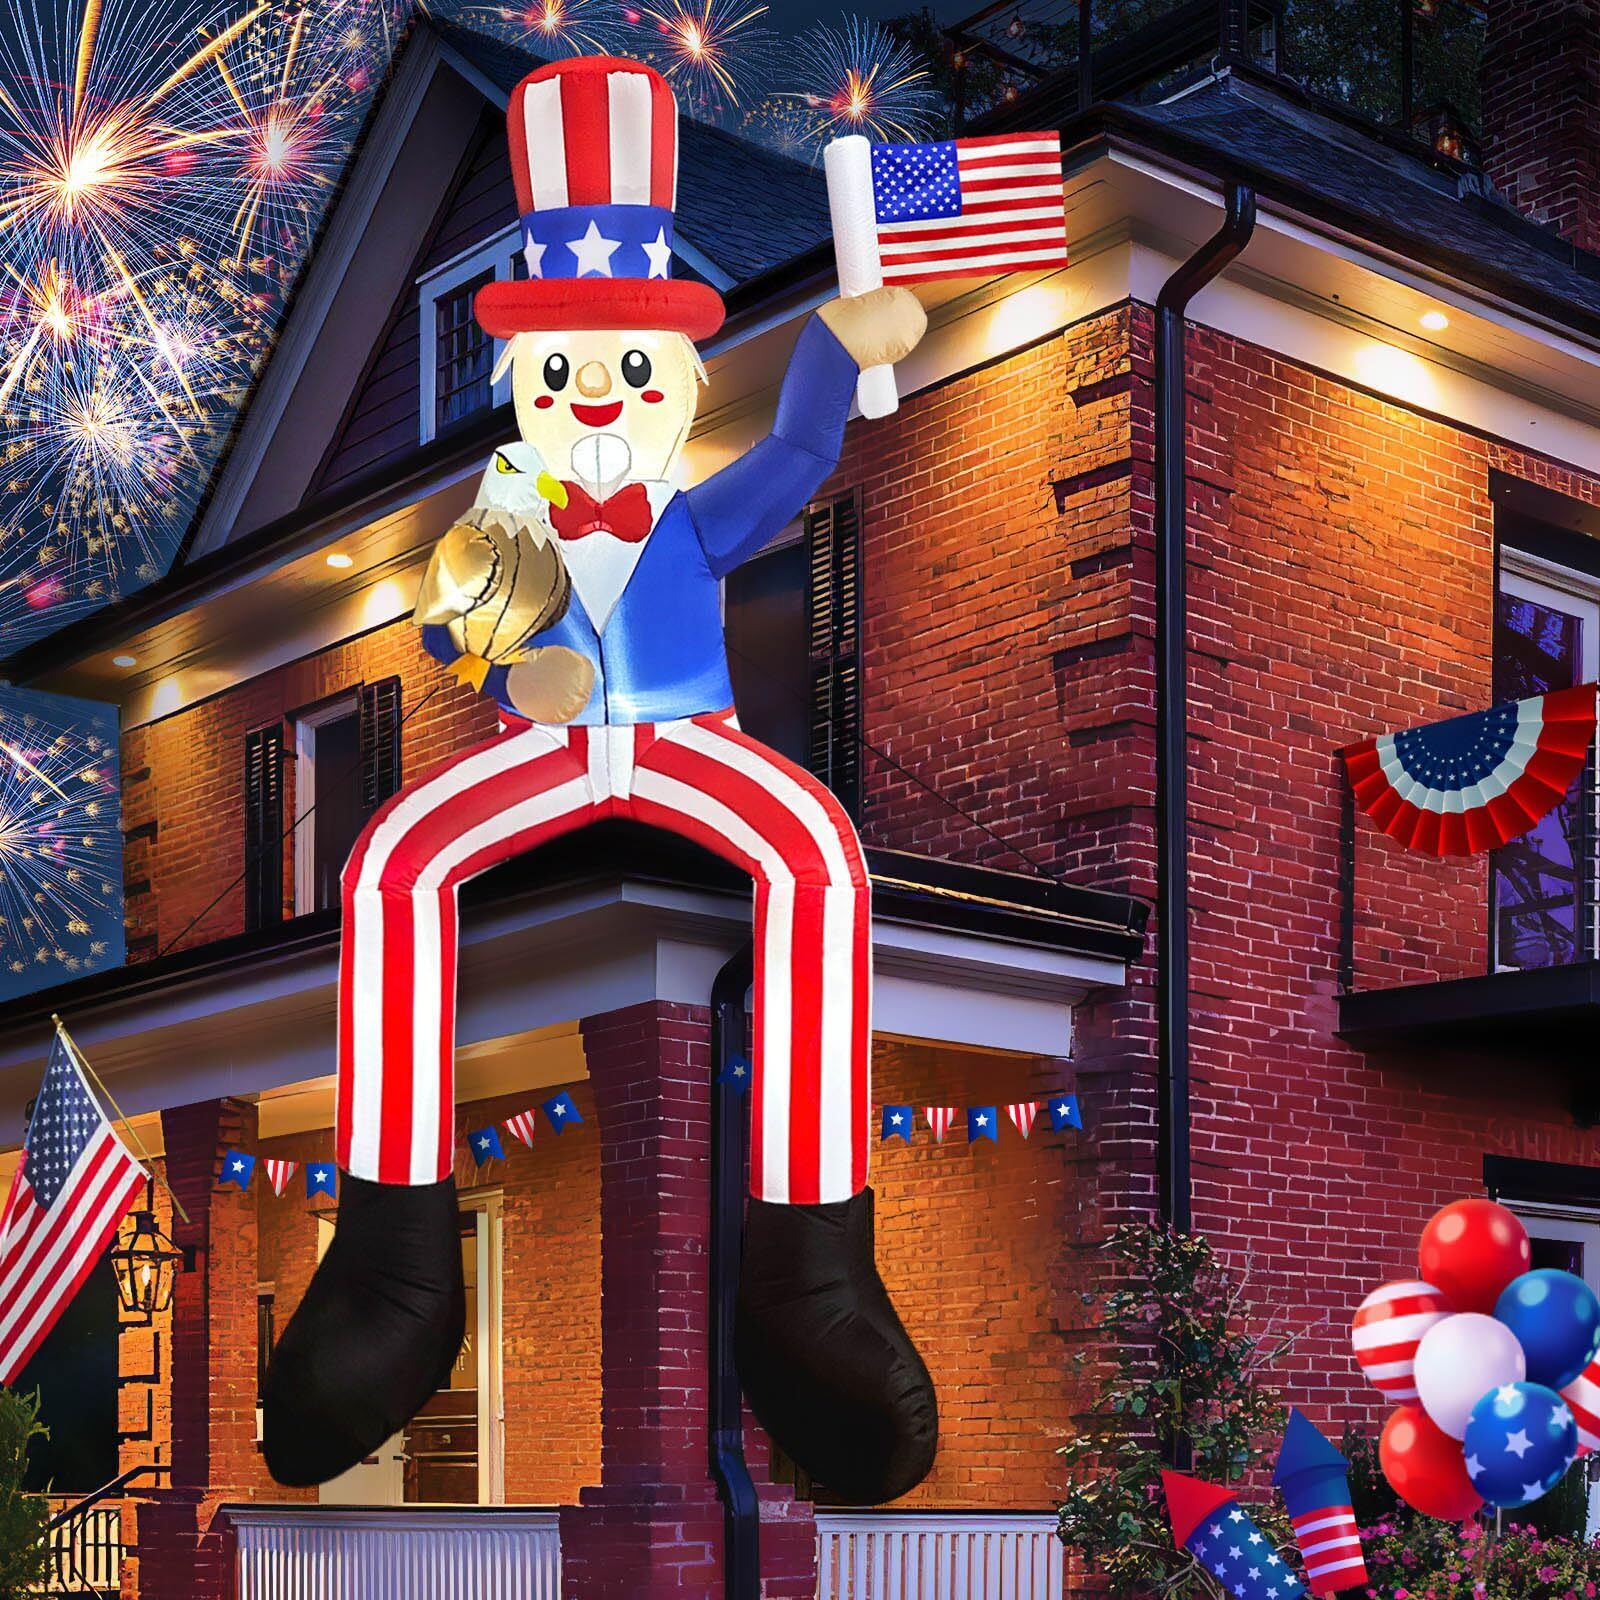 OurWarm 8FT Patriotic Independence Day 4th of July Inflatables Outdoor Decora...